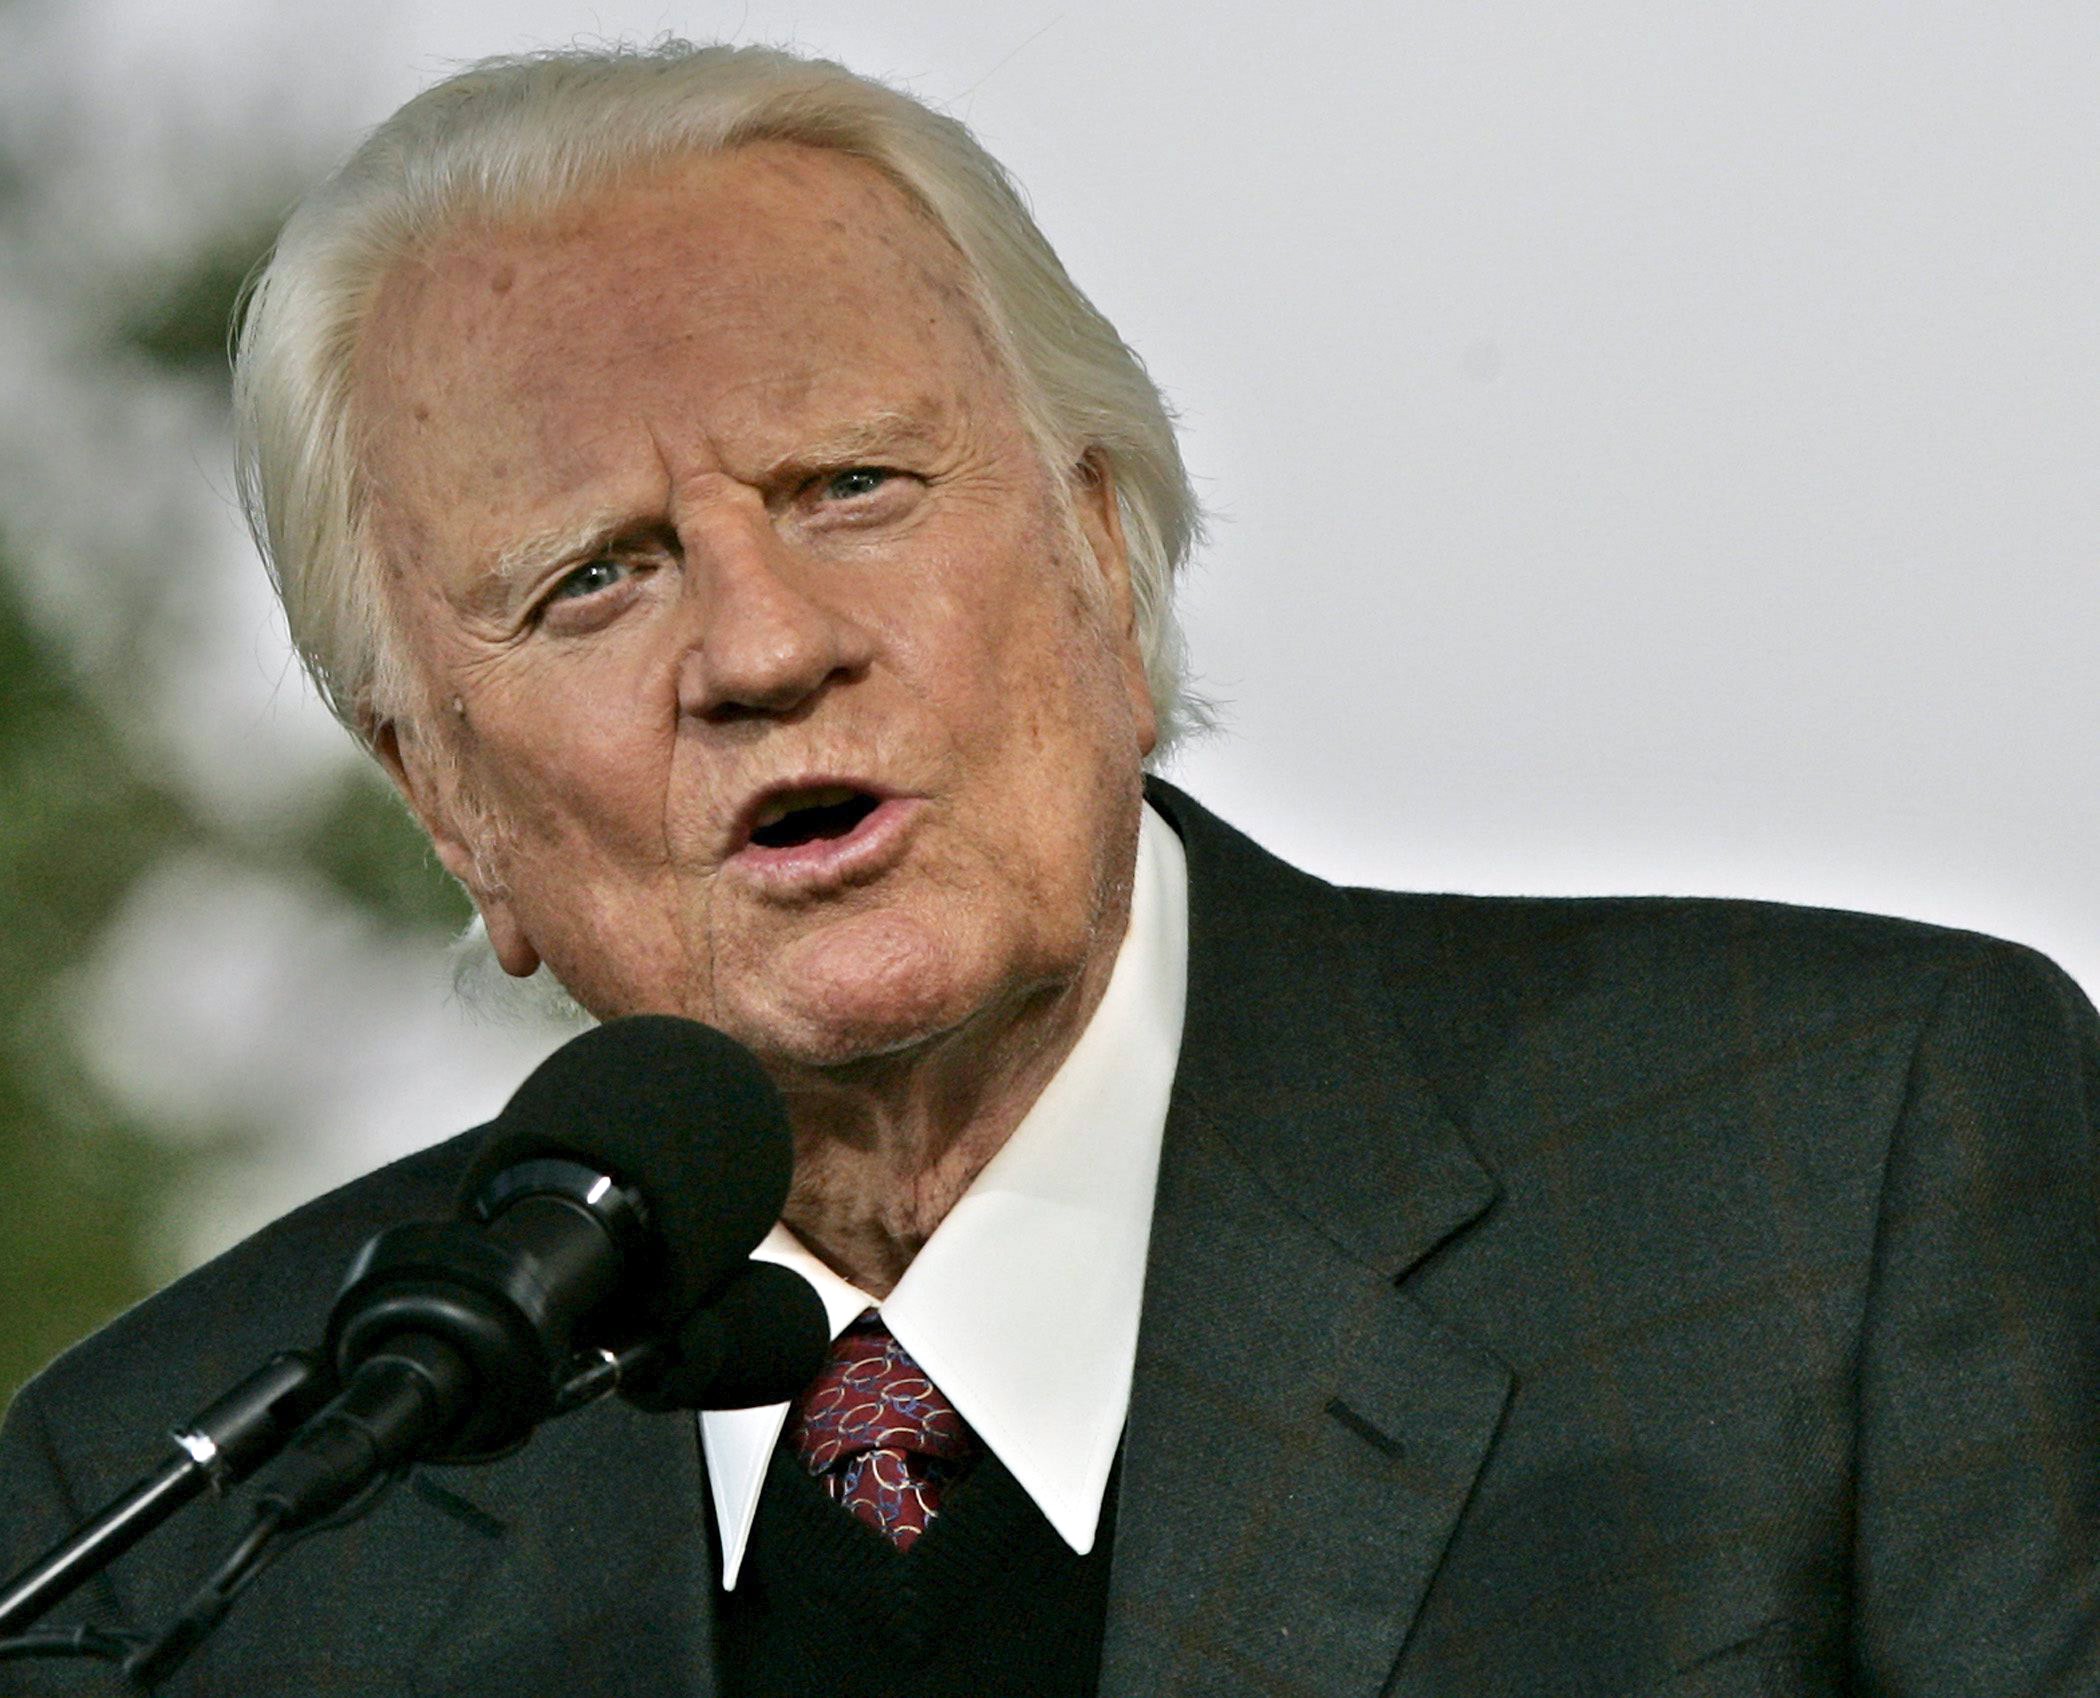 American evangelical Christian pastor Billy Graham speaks on the second night of the Greater New York Billy Graham Crusade, at Flushing Meadows Corona Park in Queens, New York, on June 25, 2005. Media reports state that Billy Graham died aged 99 on Feb. 21, 2018, at his home Montreat, North Carolina. EFE